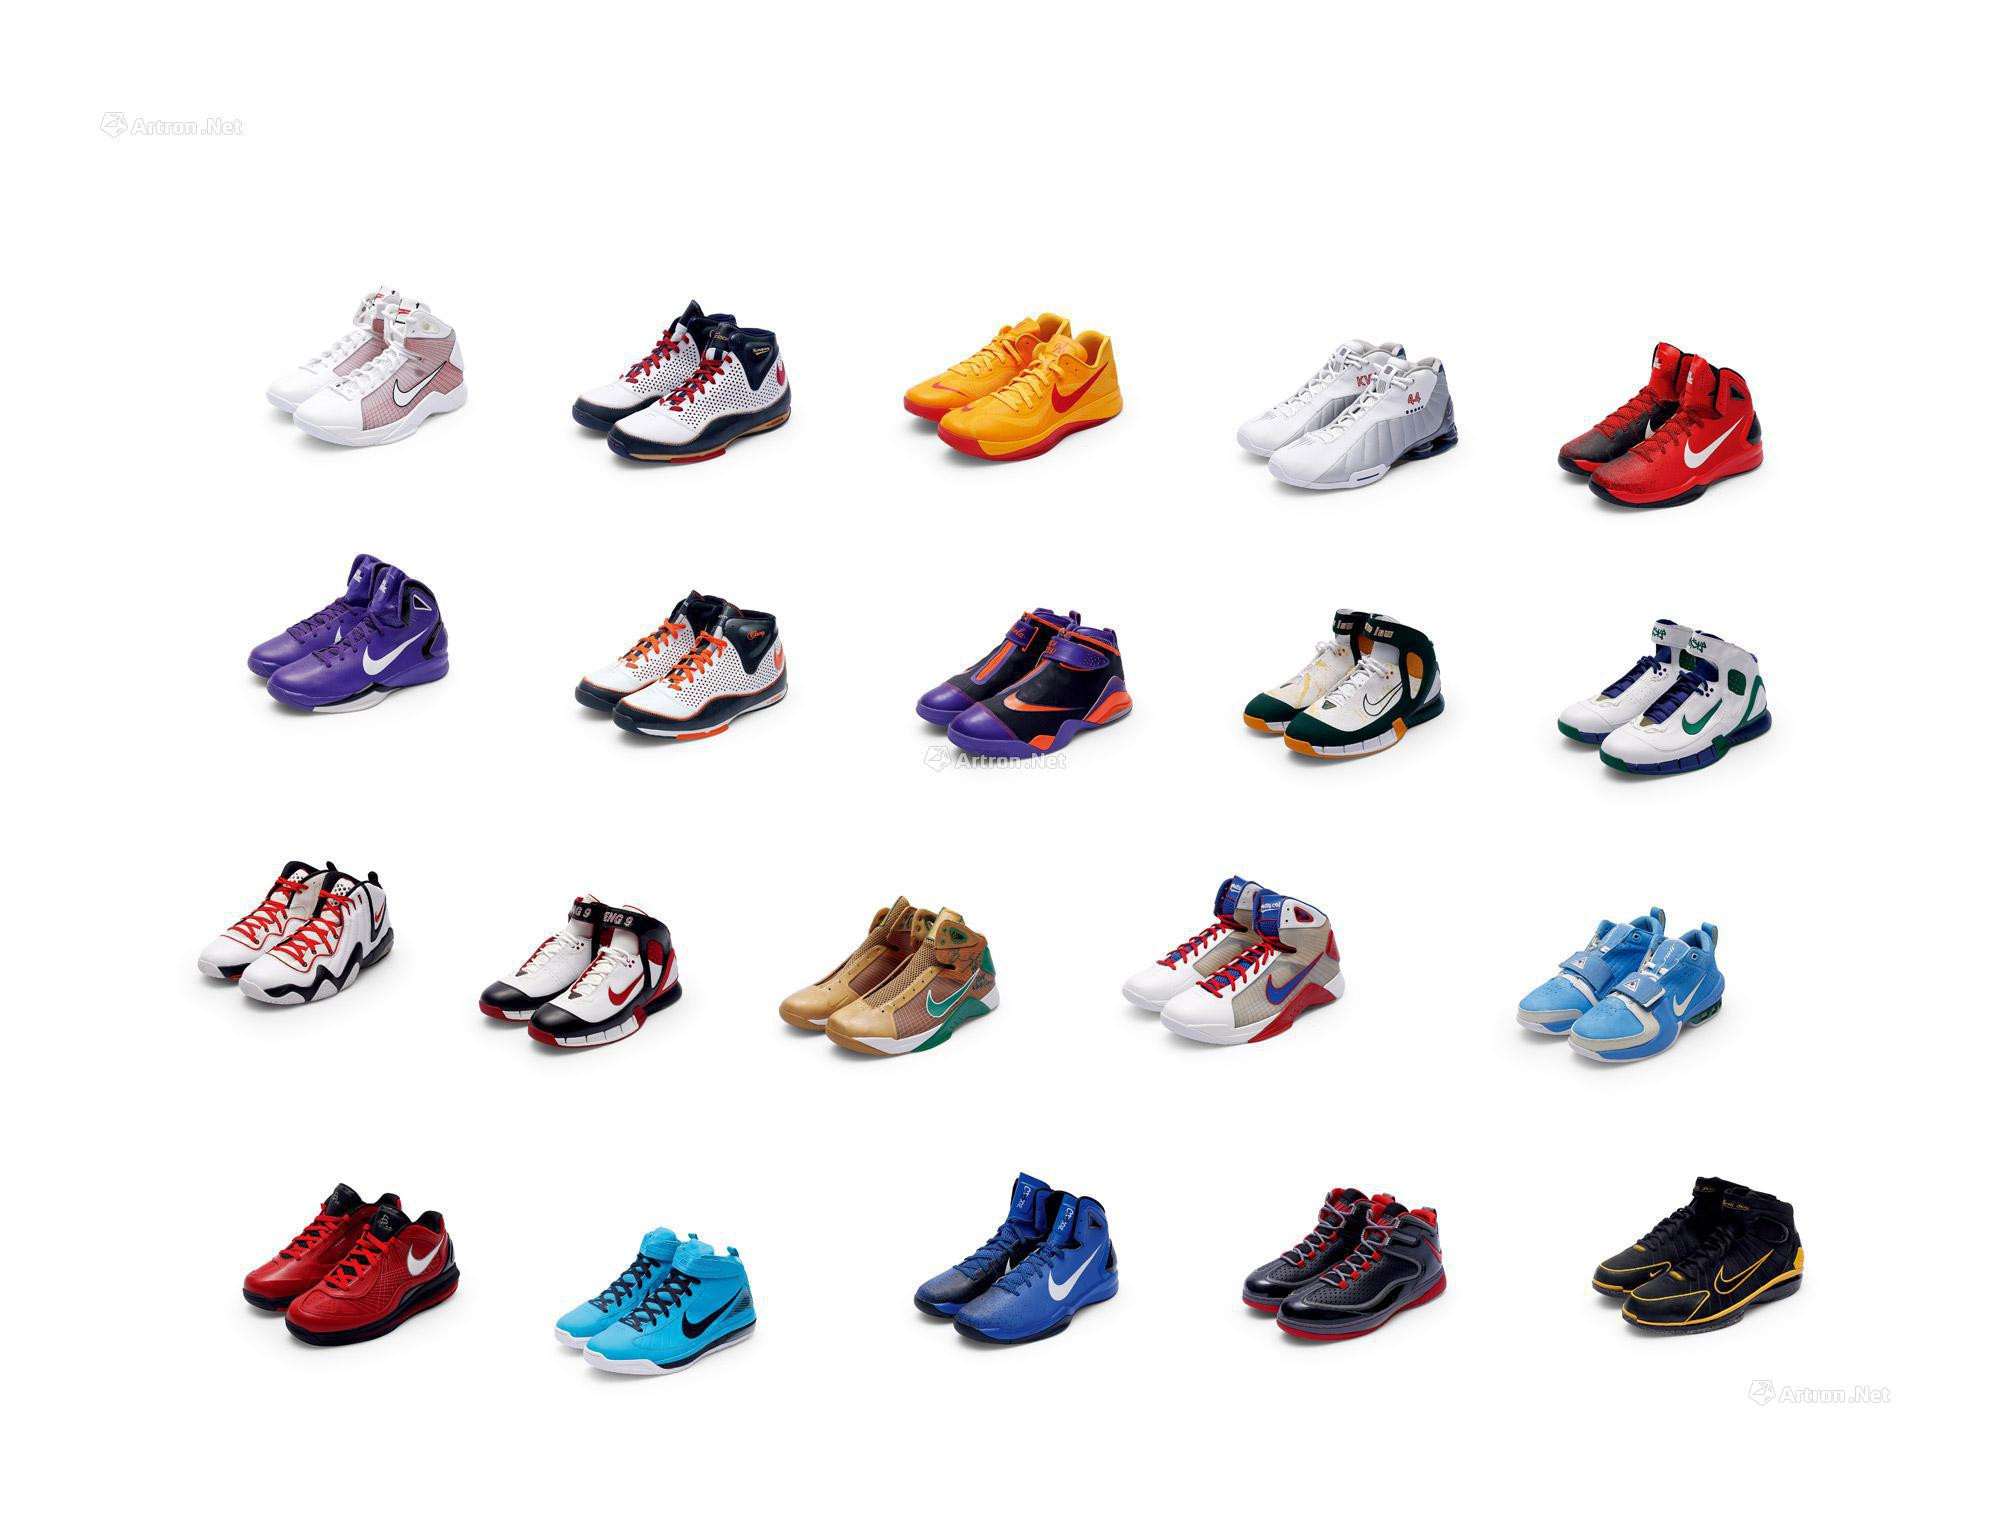 Multiple Players Exclusive Svneaker Collection  20 Pairs of Player Exclusive Sneakers